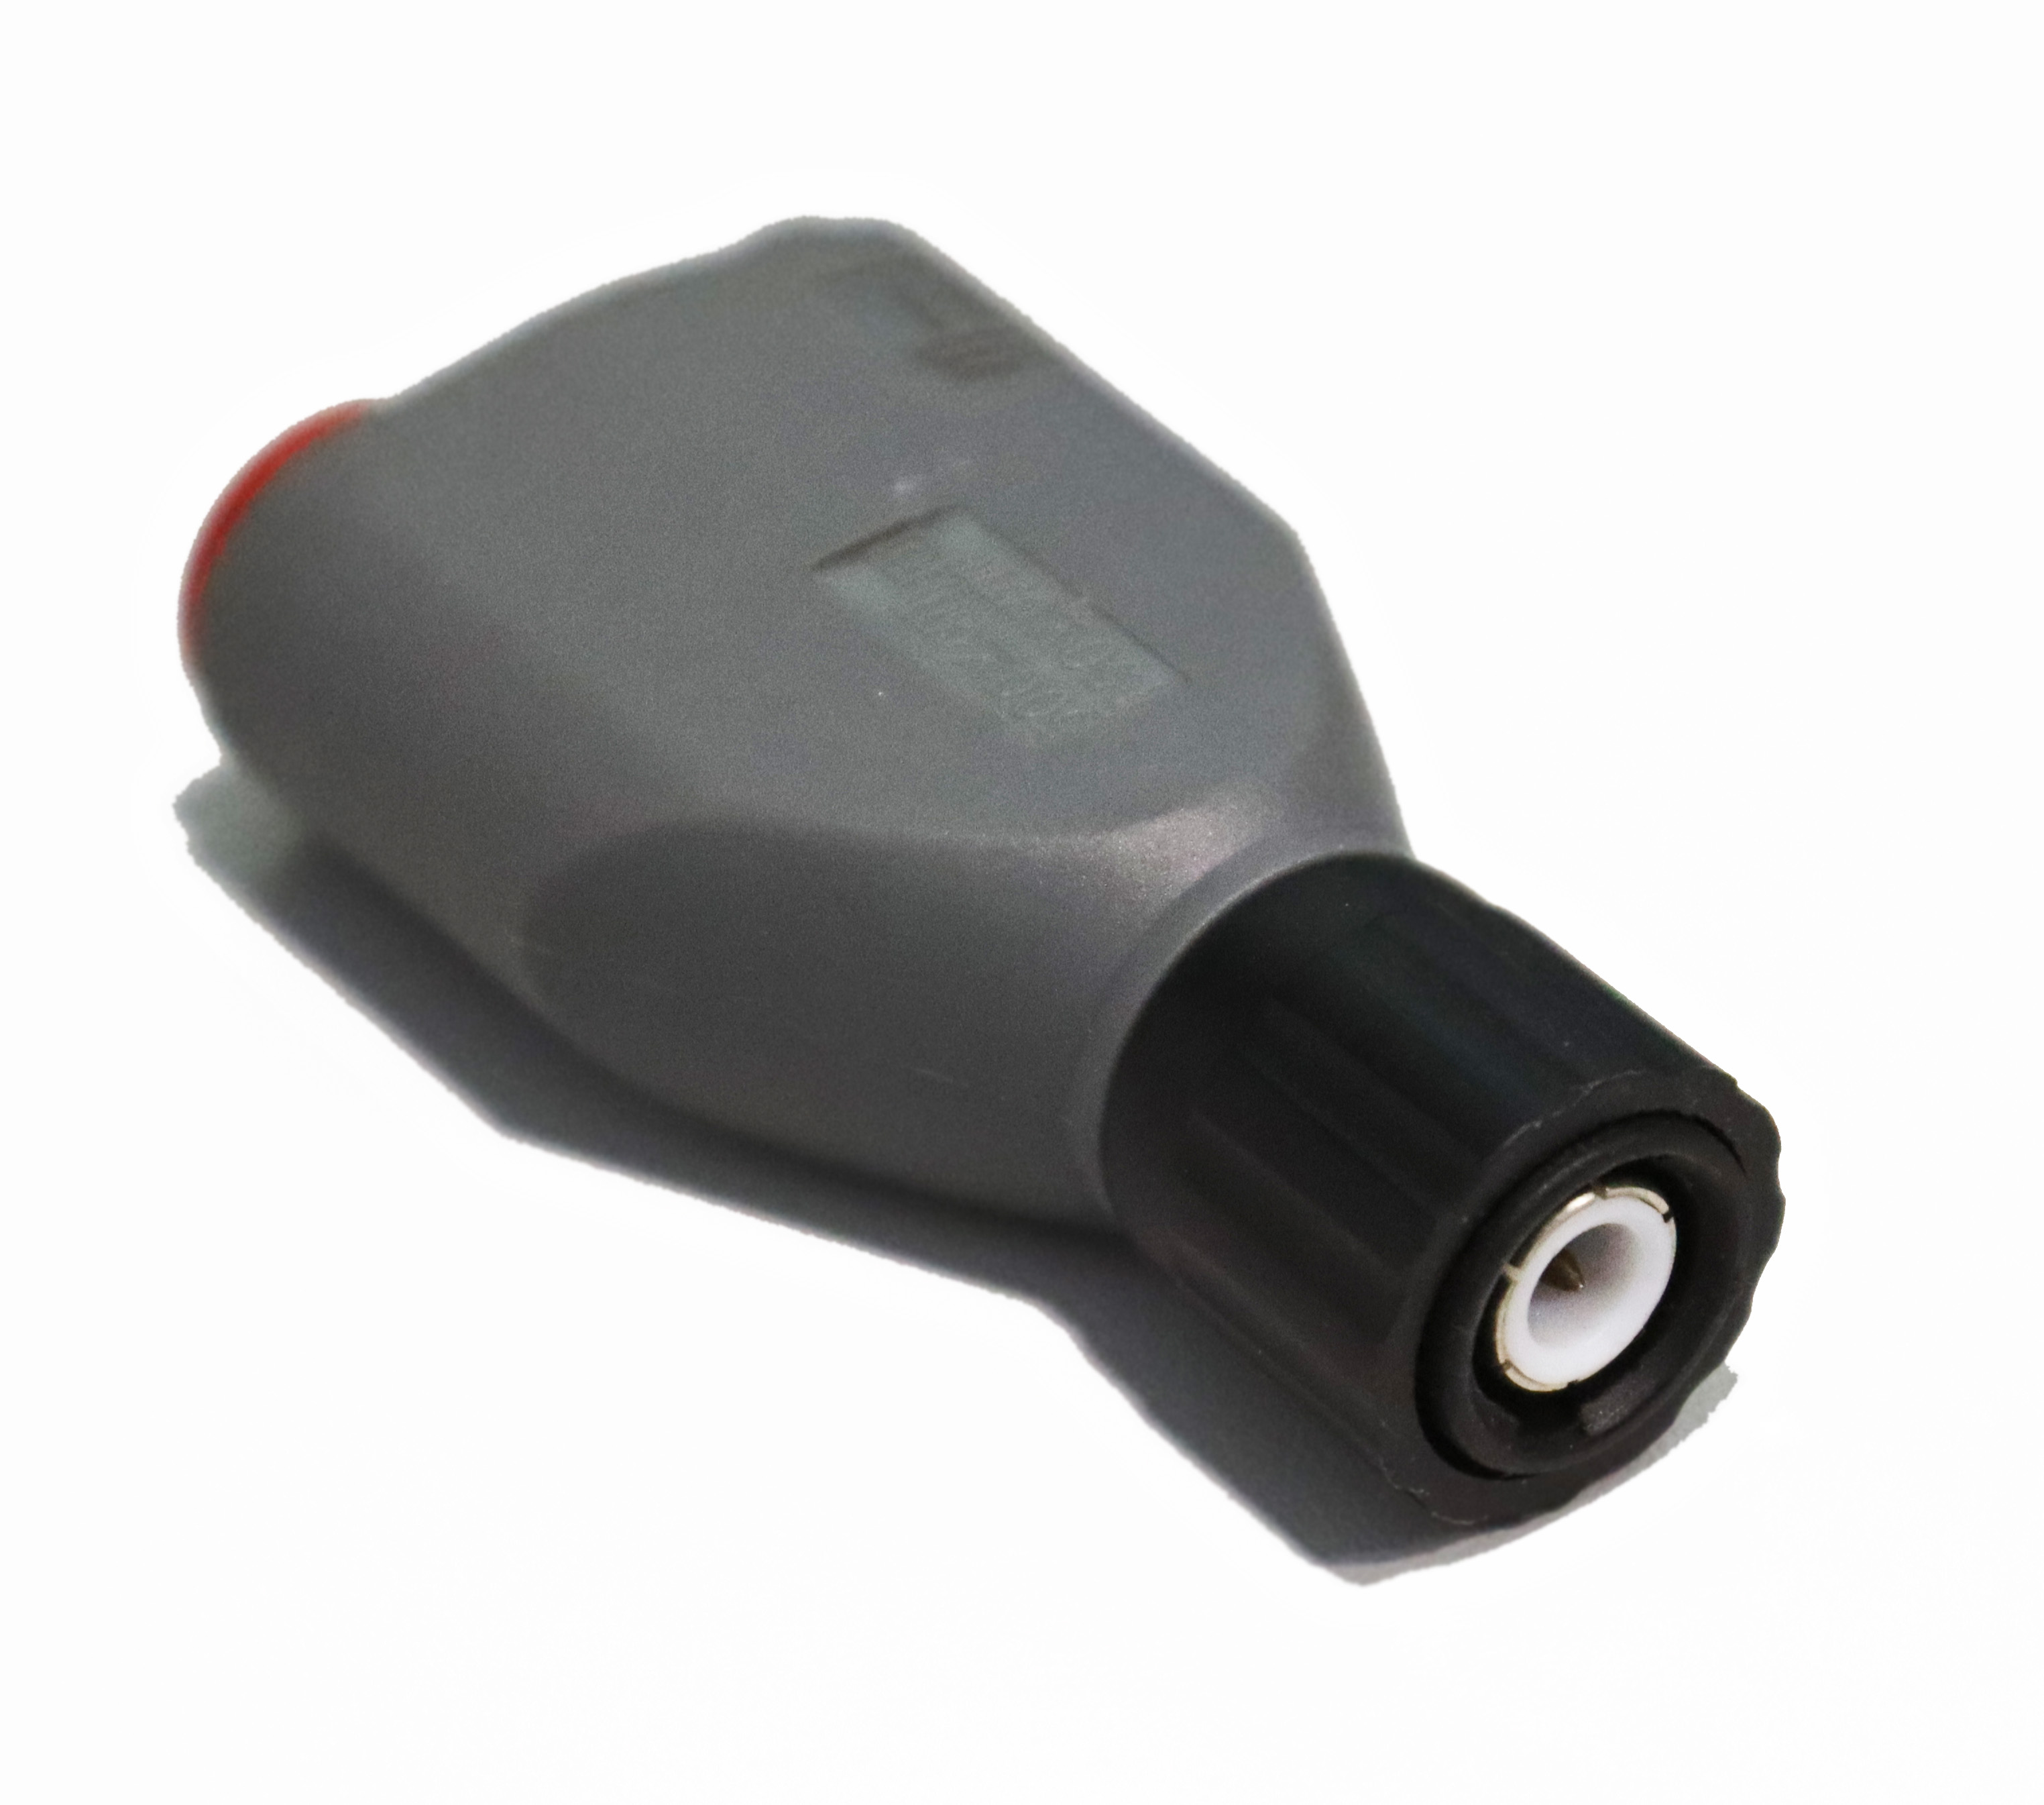 «PeakTech® P 7055» BNC to 4mm Adapter